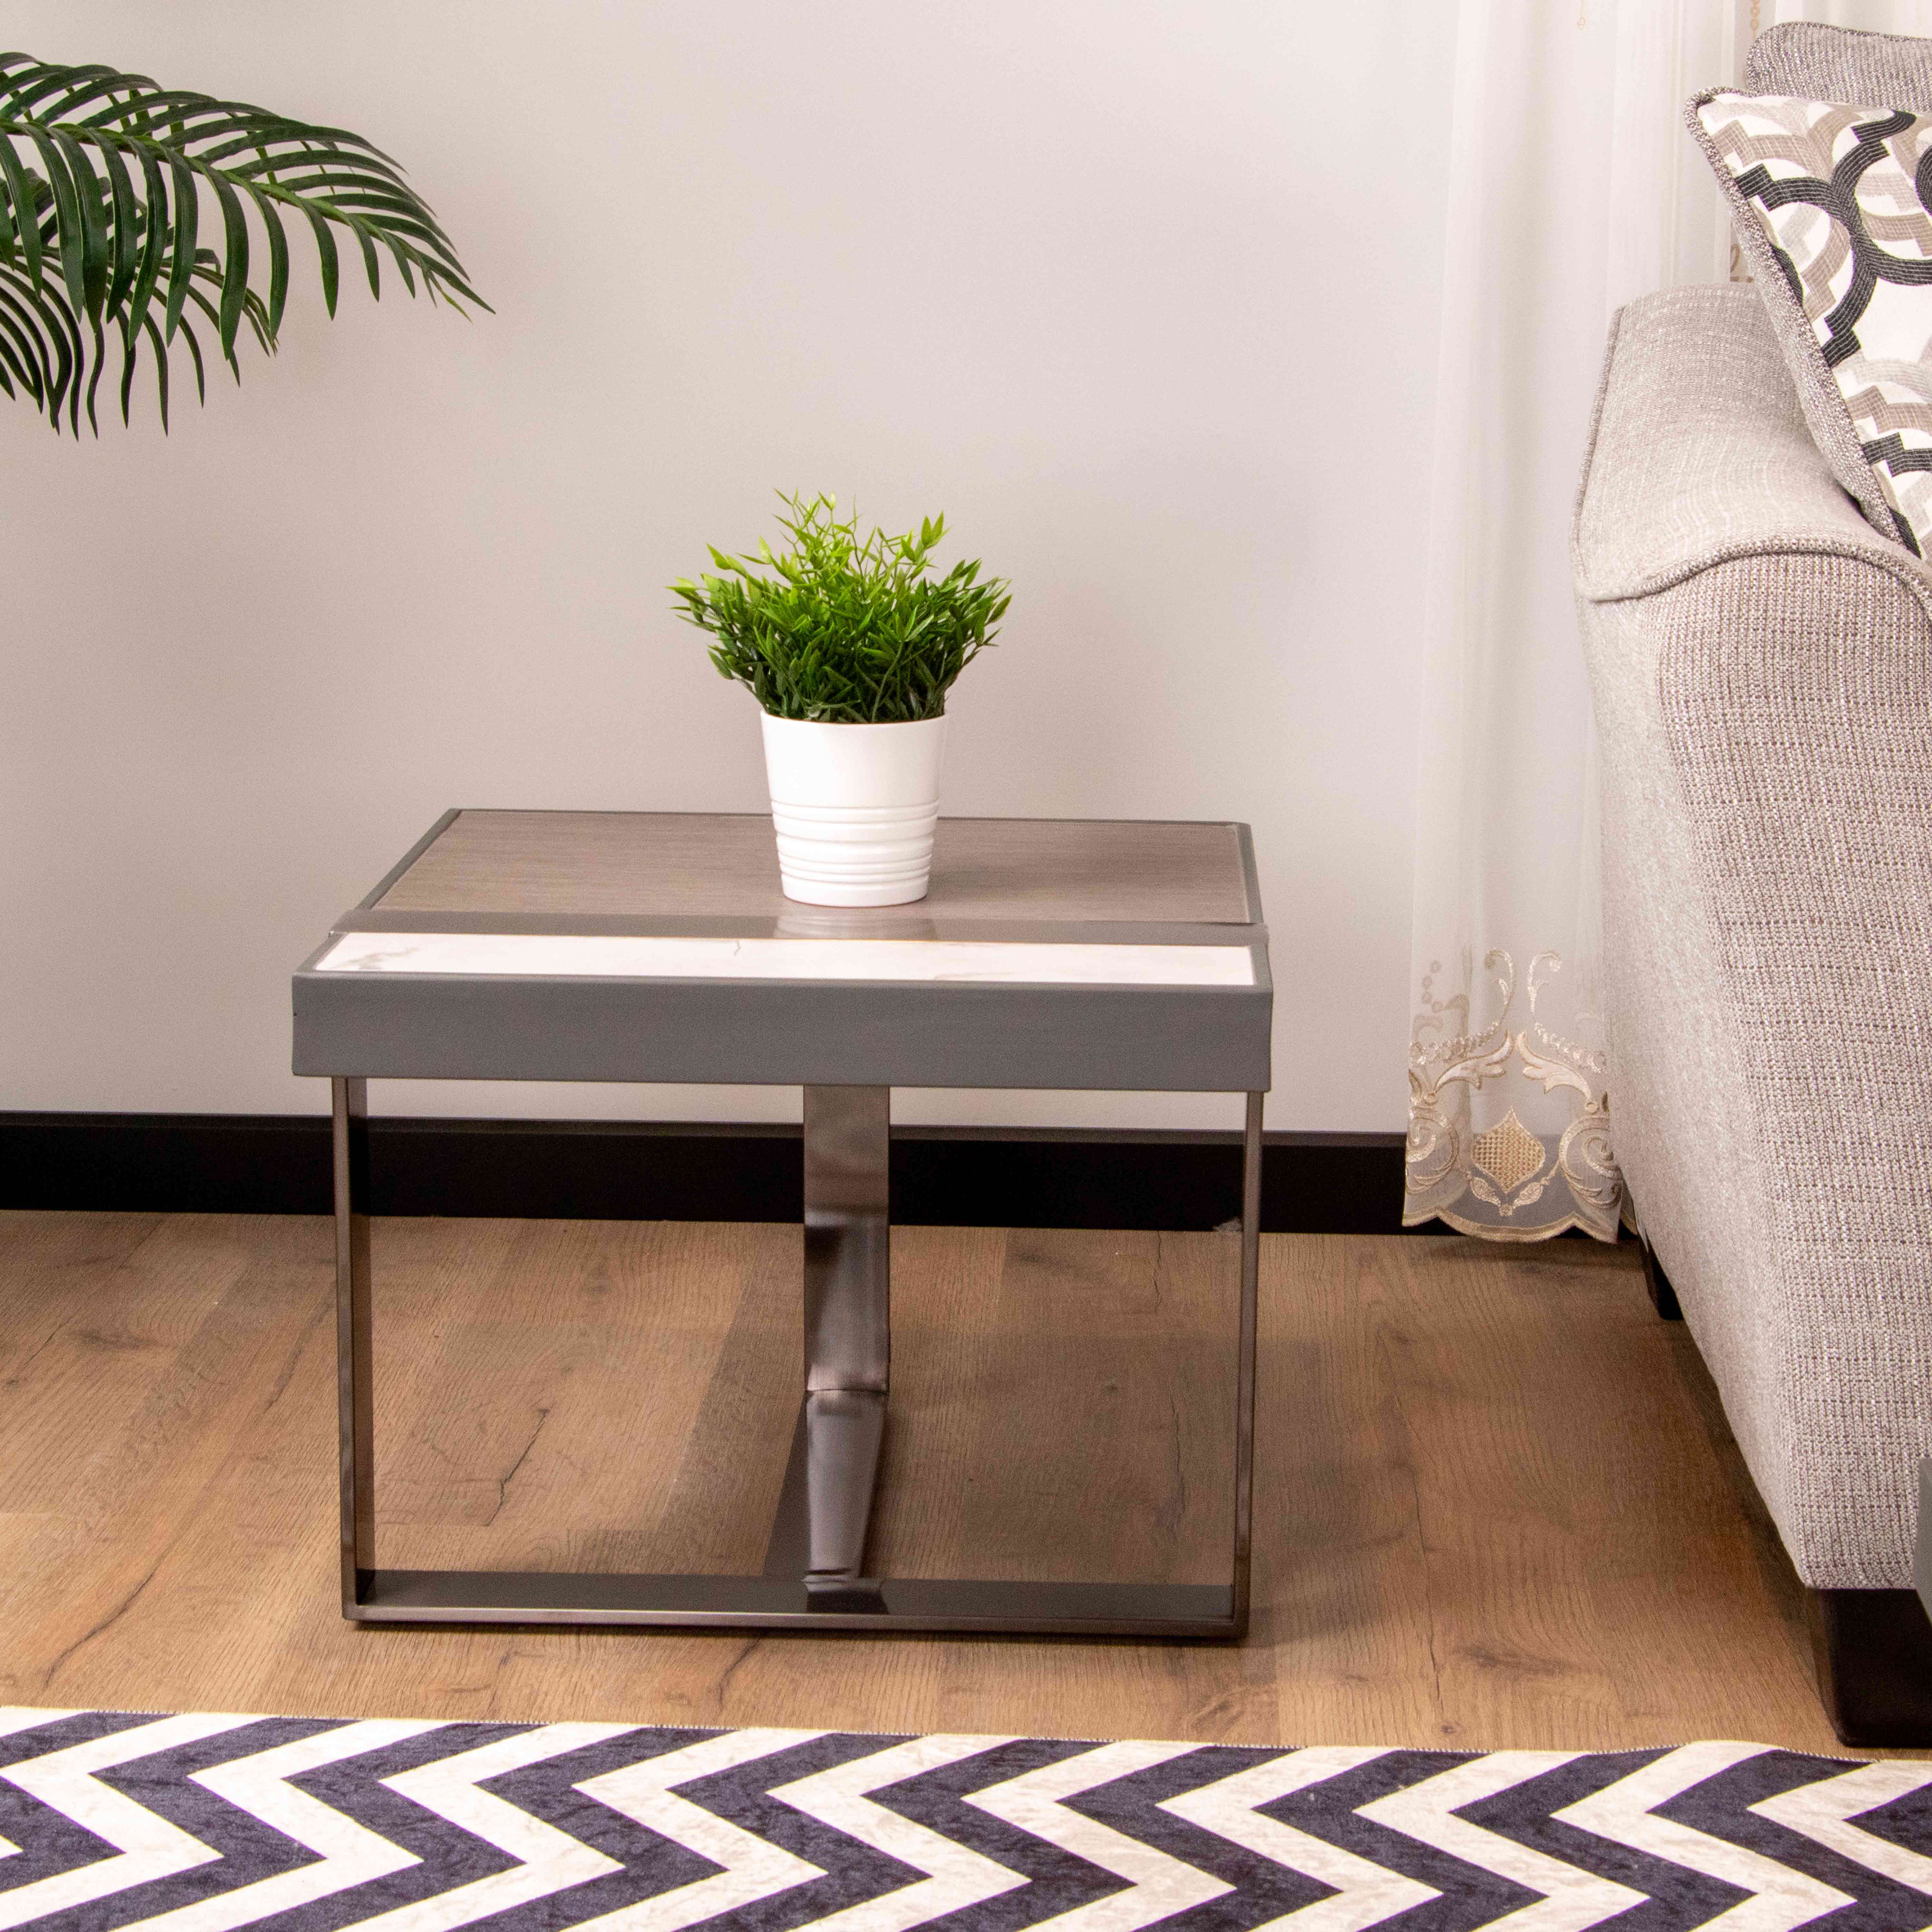 CJ912B SIDE TABLE WHITE AND GREY